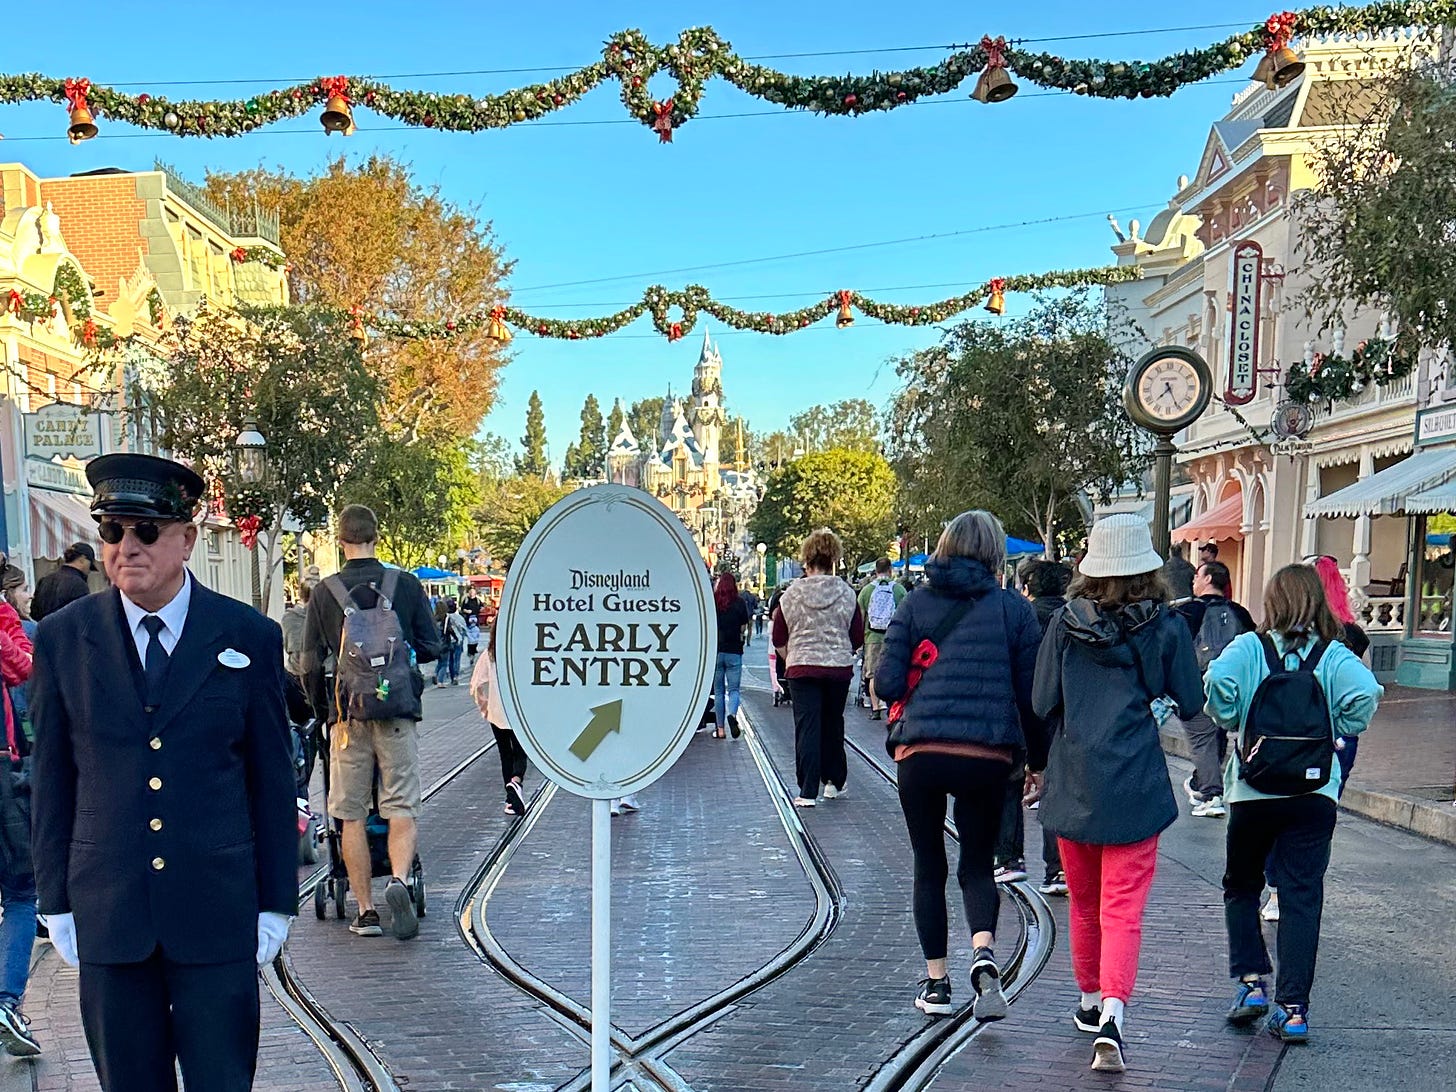 Disneyland Main Street during early entry